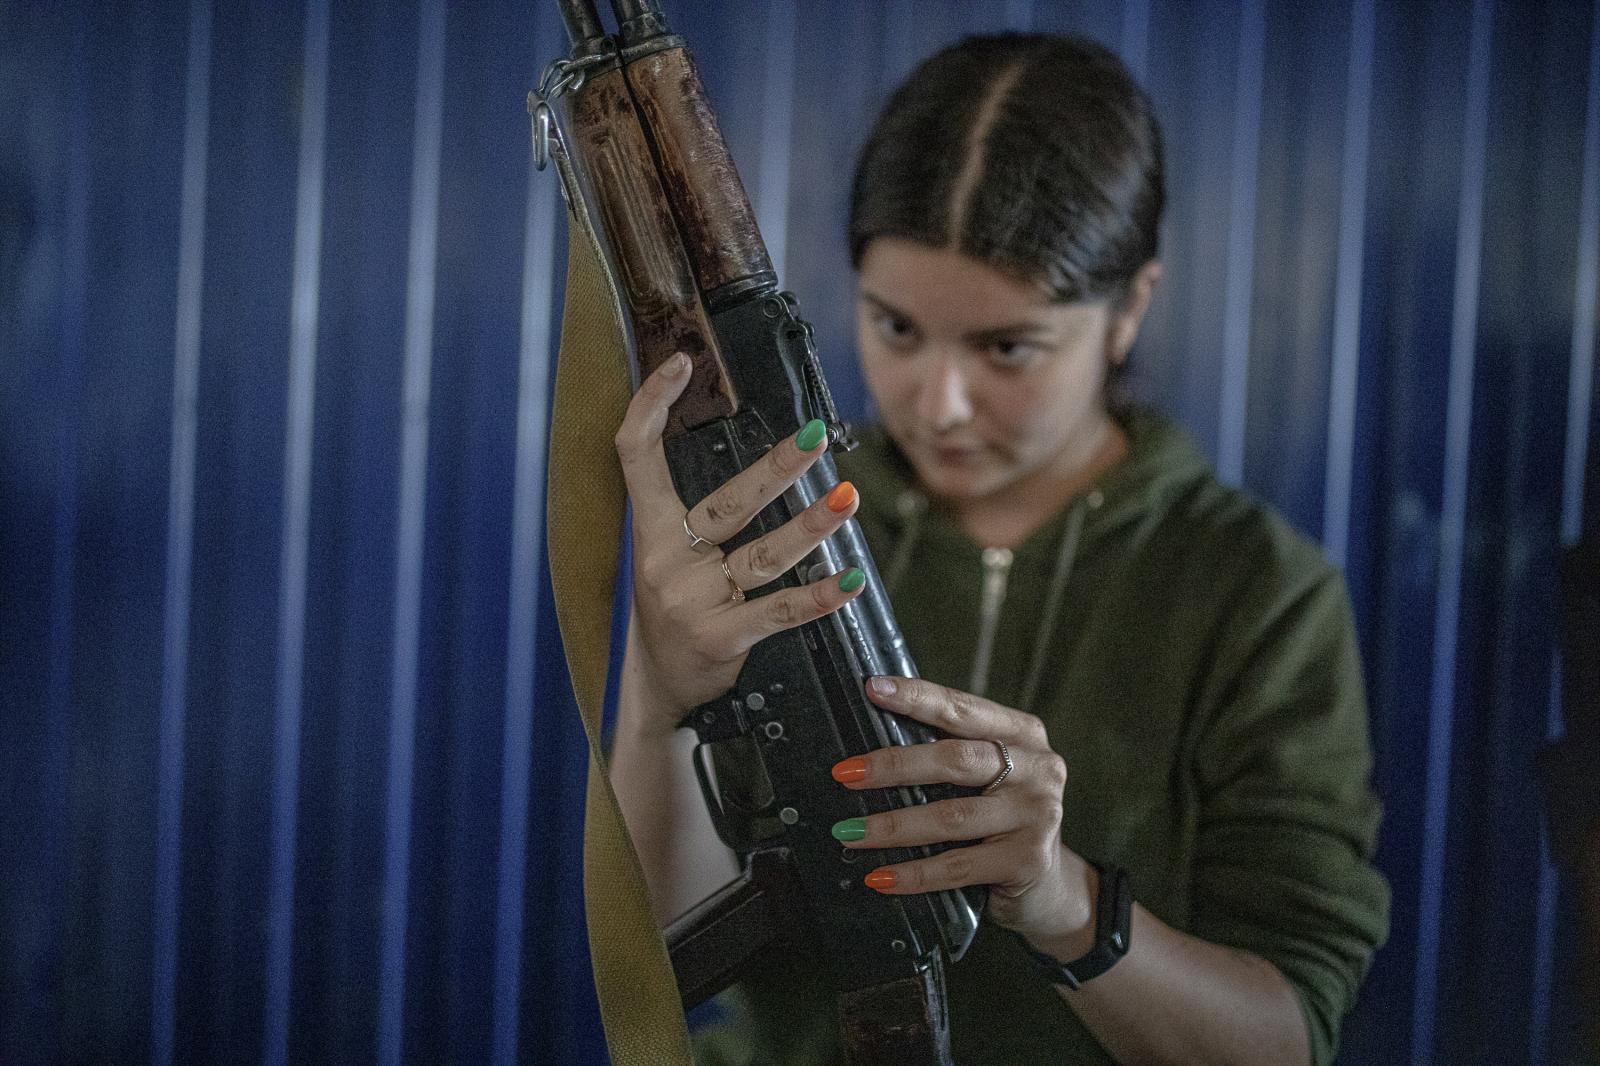 Defenders in training: empowering Ukrainian civilians amidst ongoing war - KYIV, UKRAINE - July 22, 2023: A woman with colored nail...